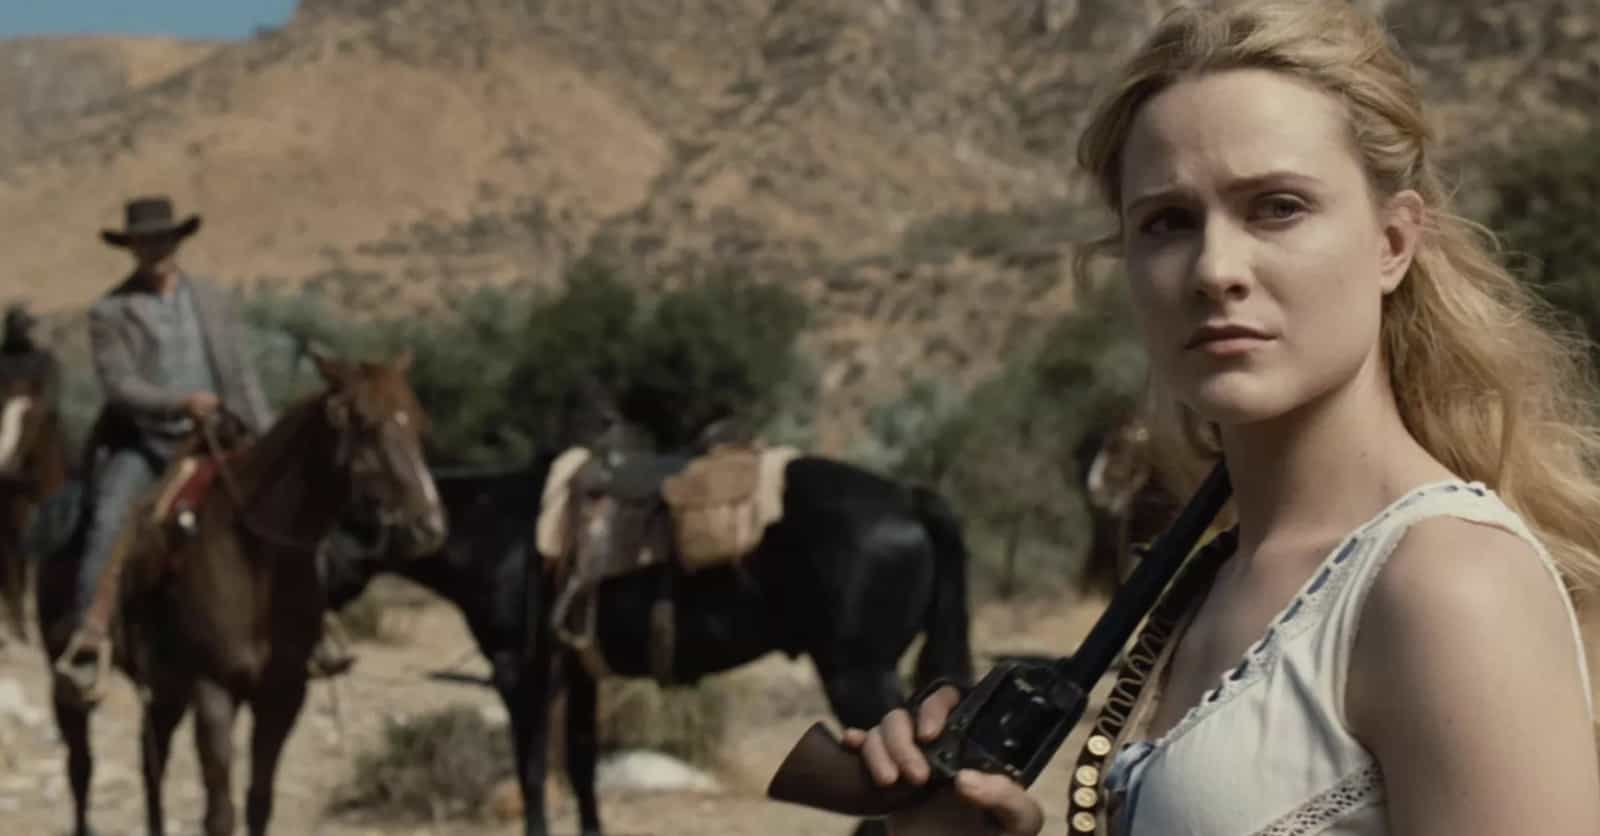 13 Small Details In 'Westworld' That Make The Show Way Better